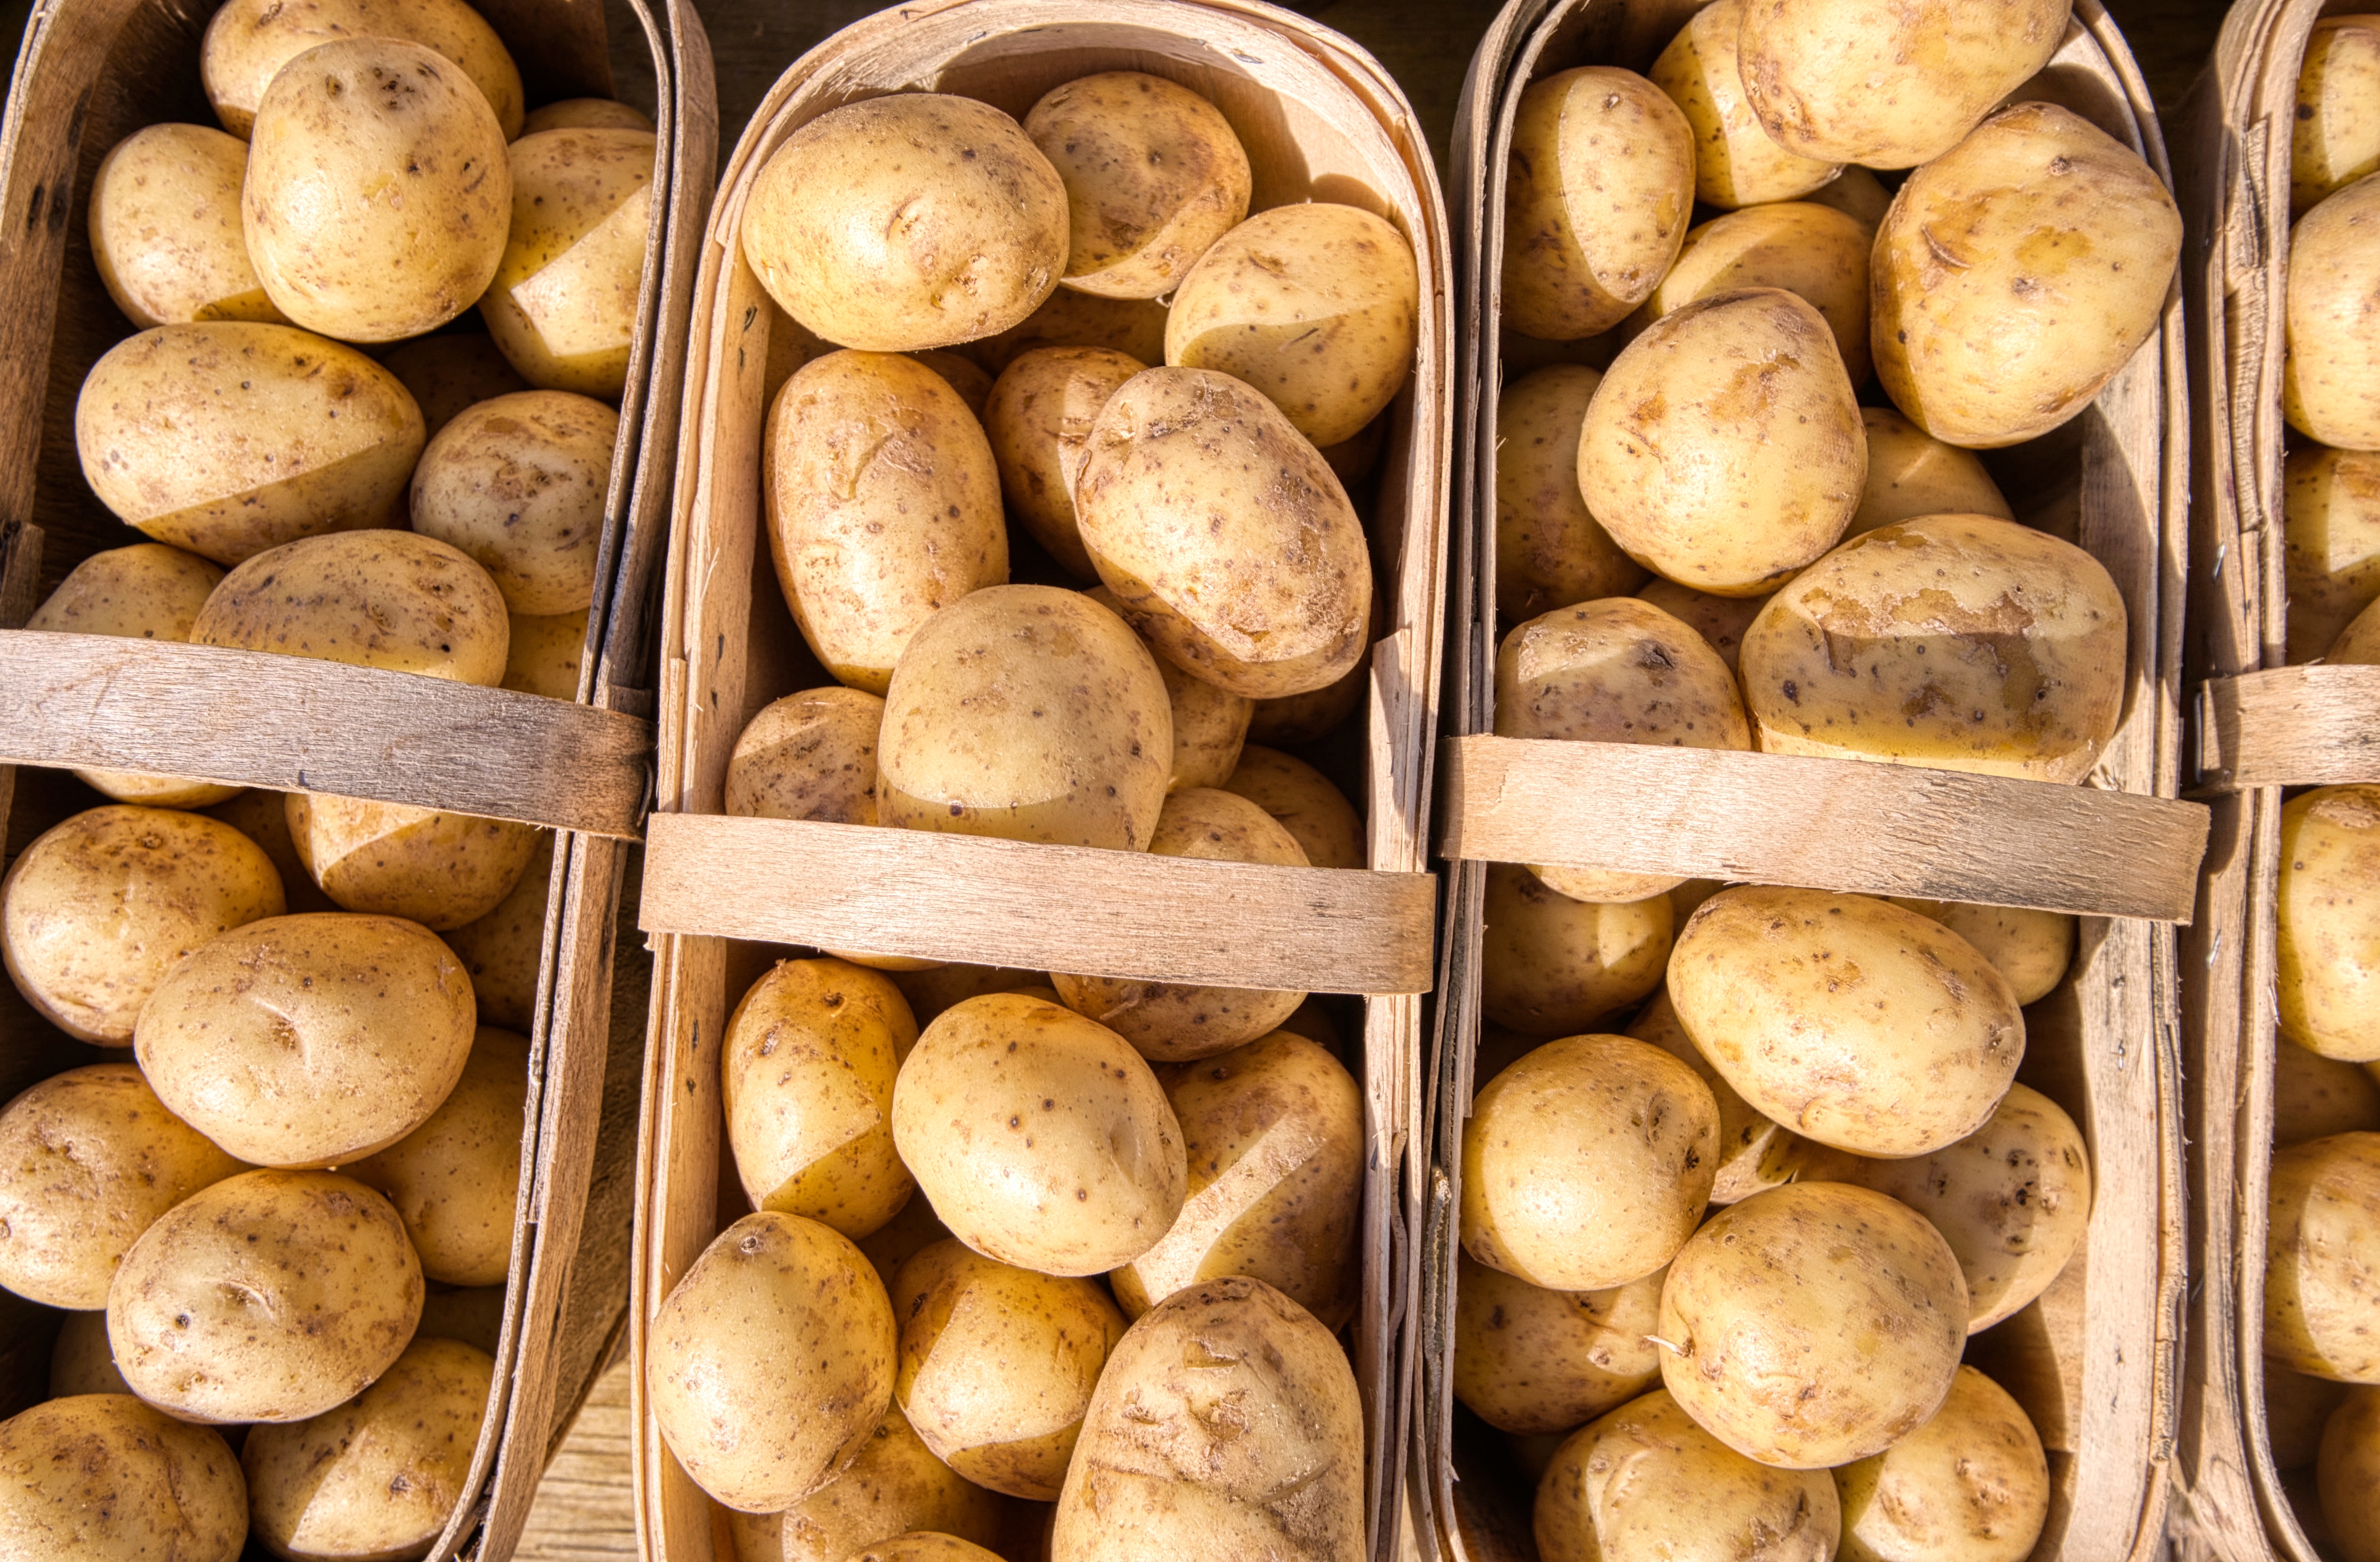 Potatoes can be part of a healthy diet